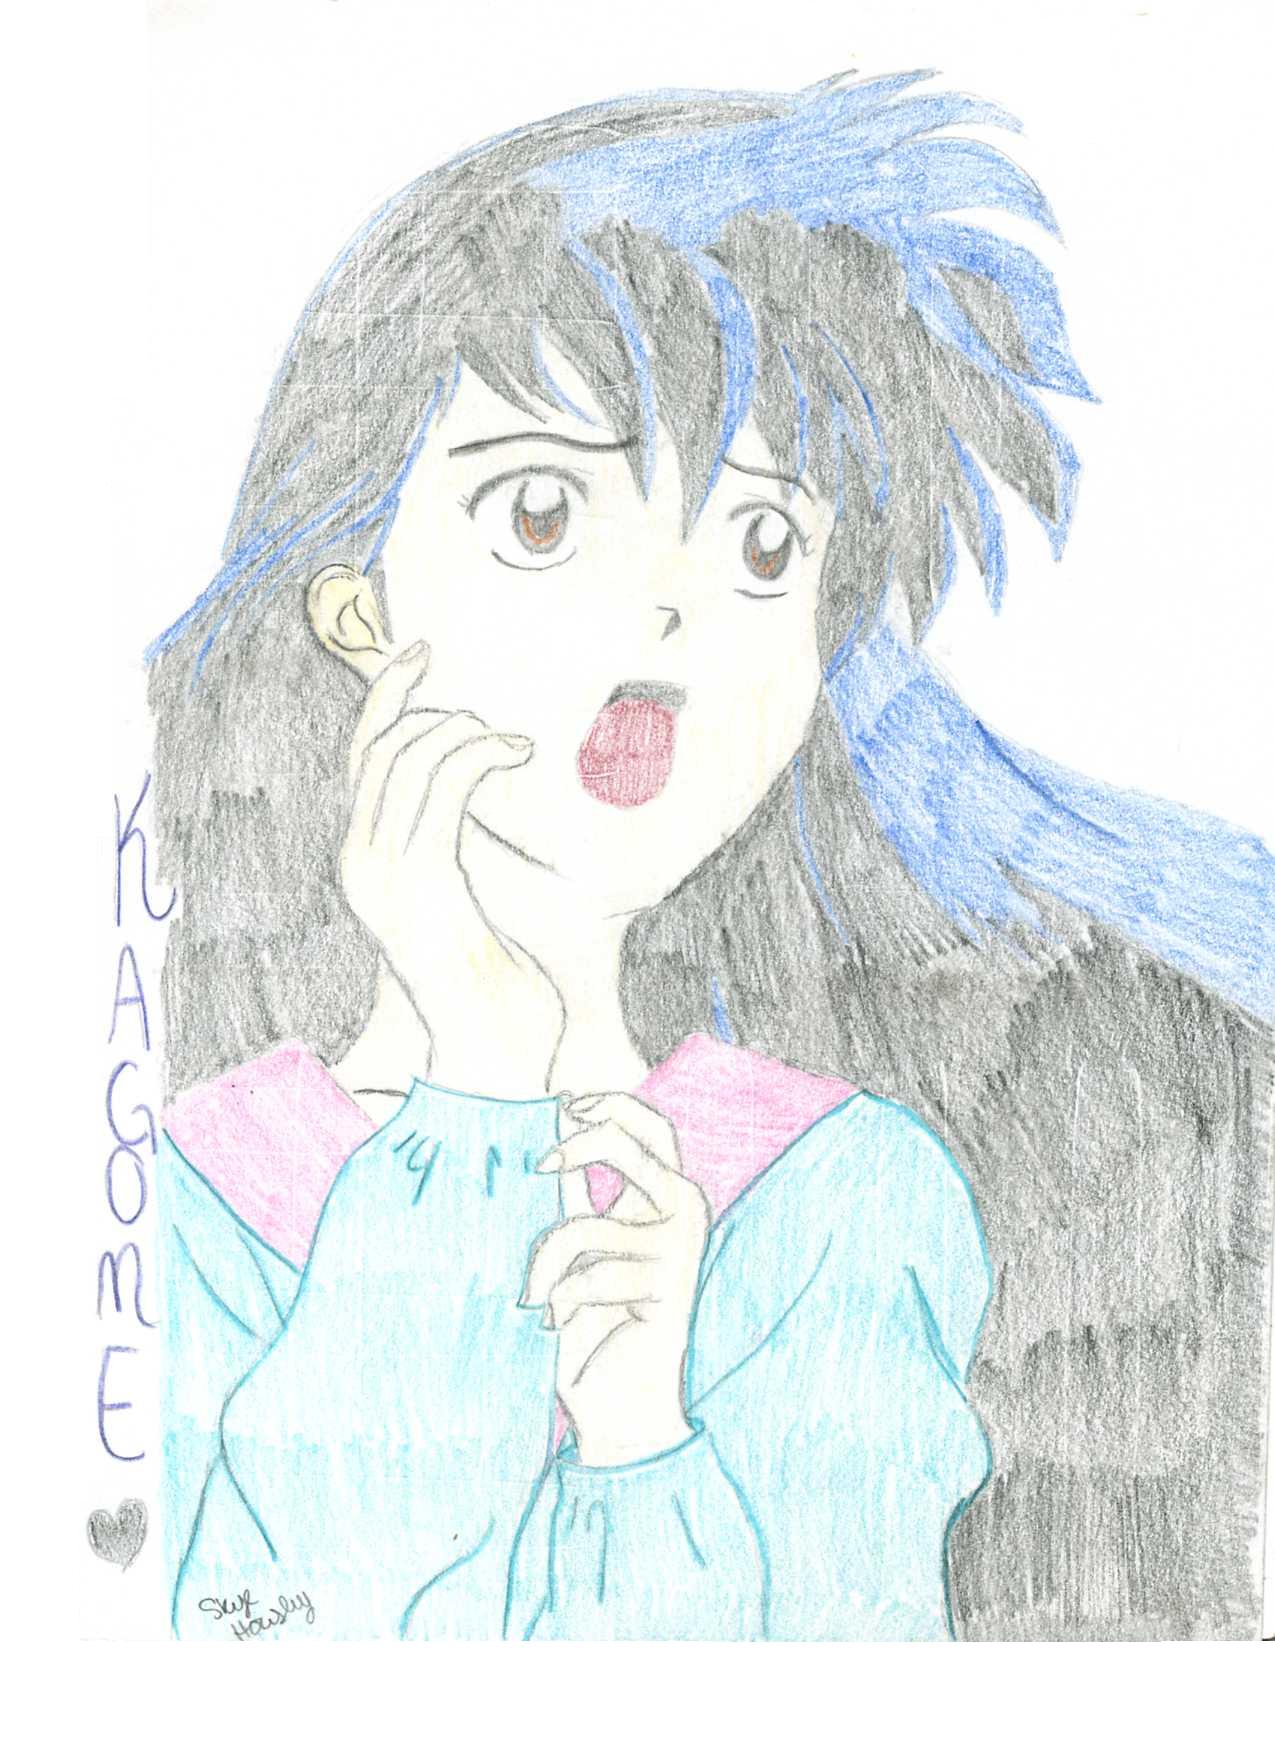 Yelling Kagome by kagome4ever15